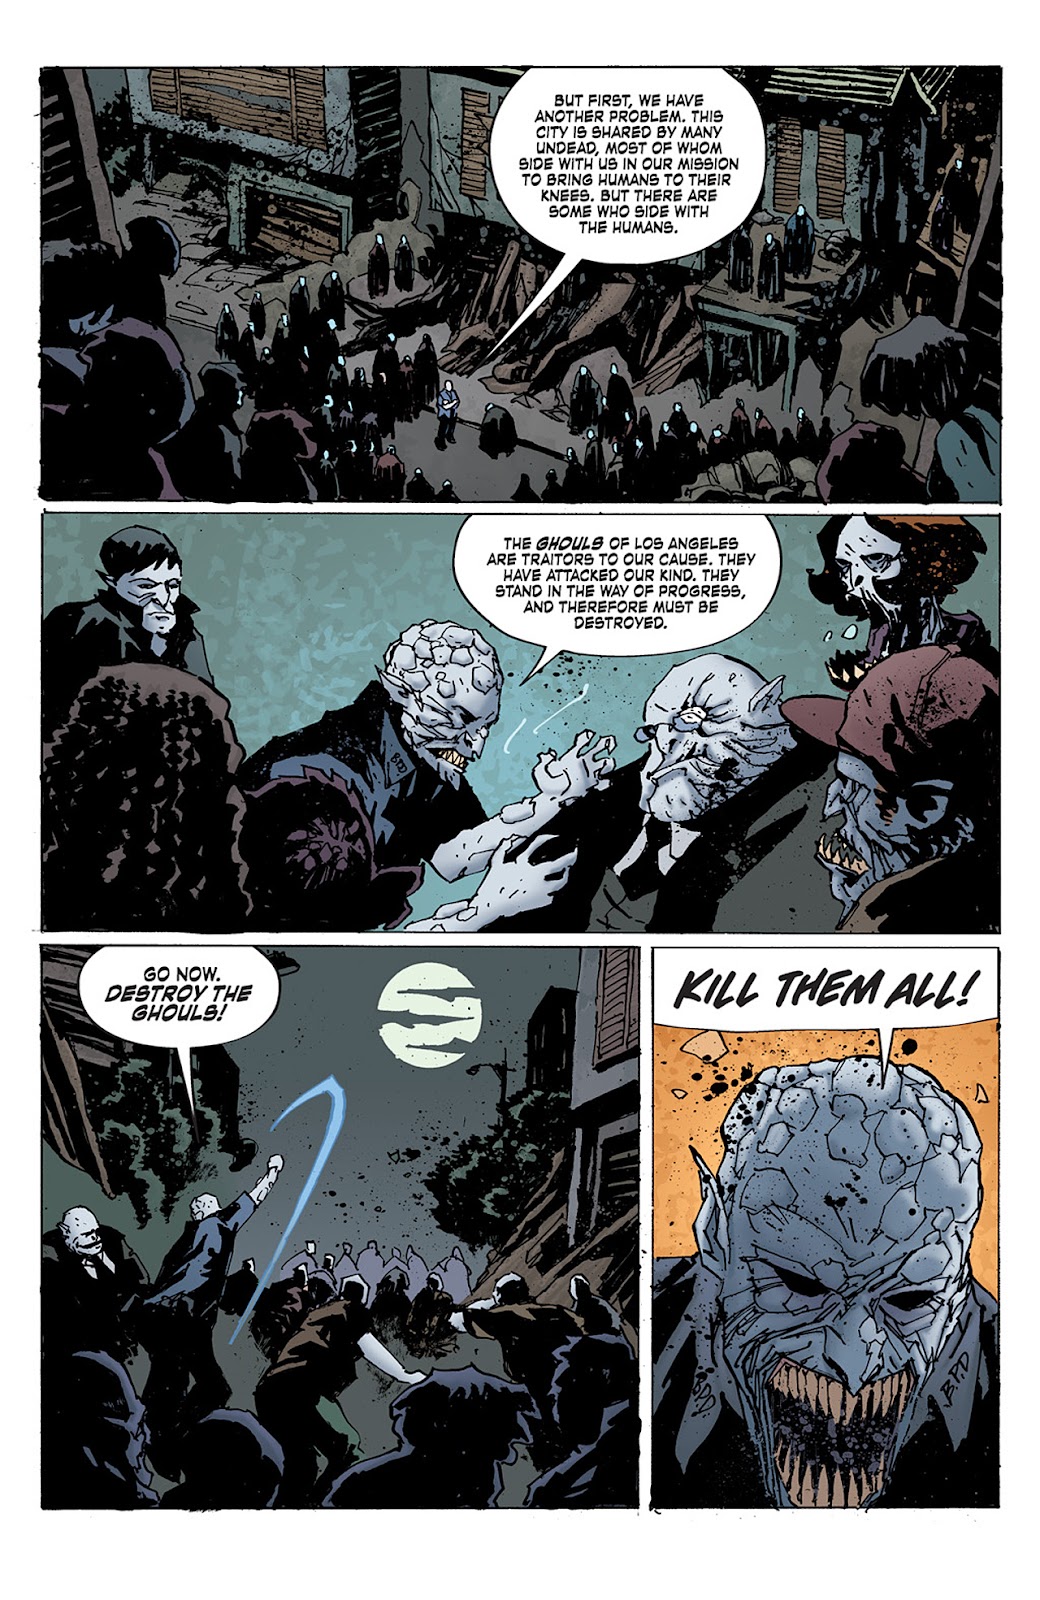 Criminal Macabre: Final Night - The 30 Days of Night Crossover issue 2 - Page 13